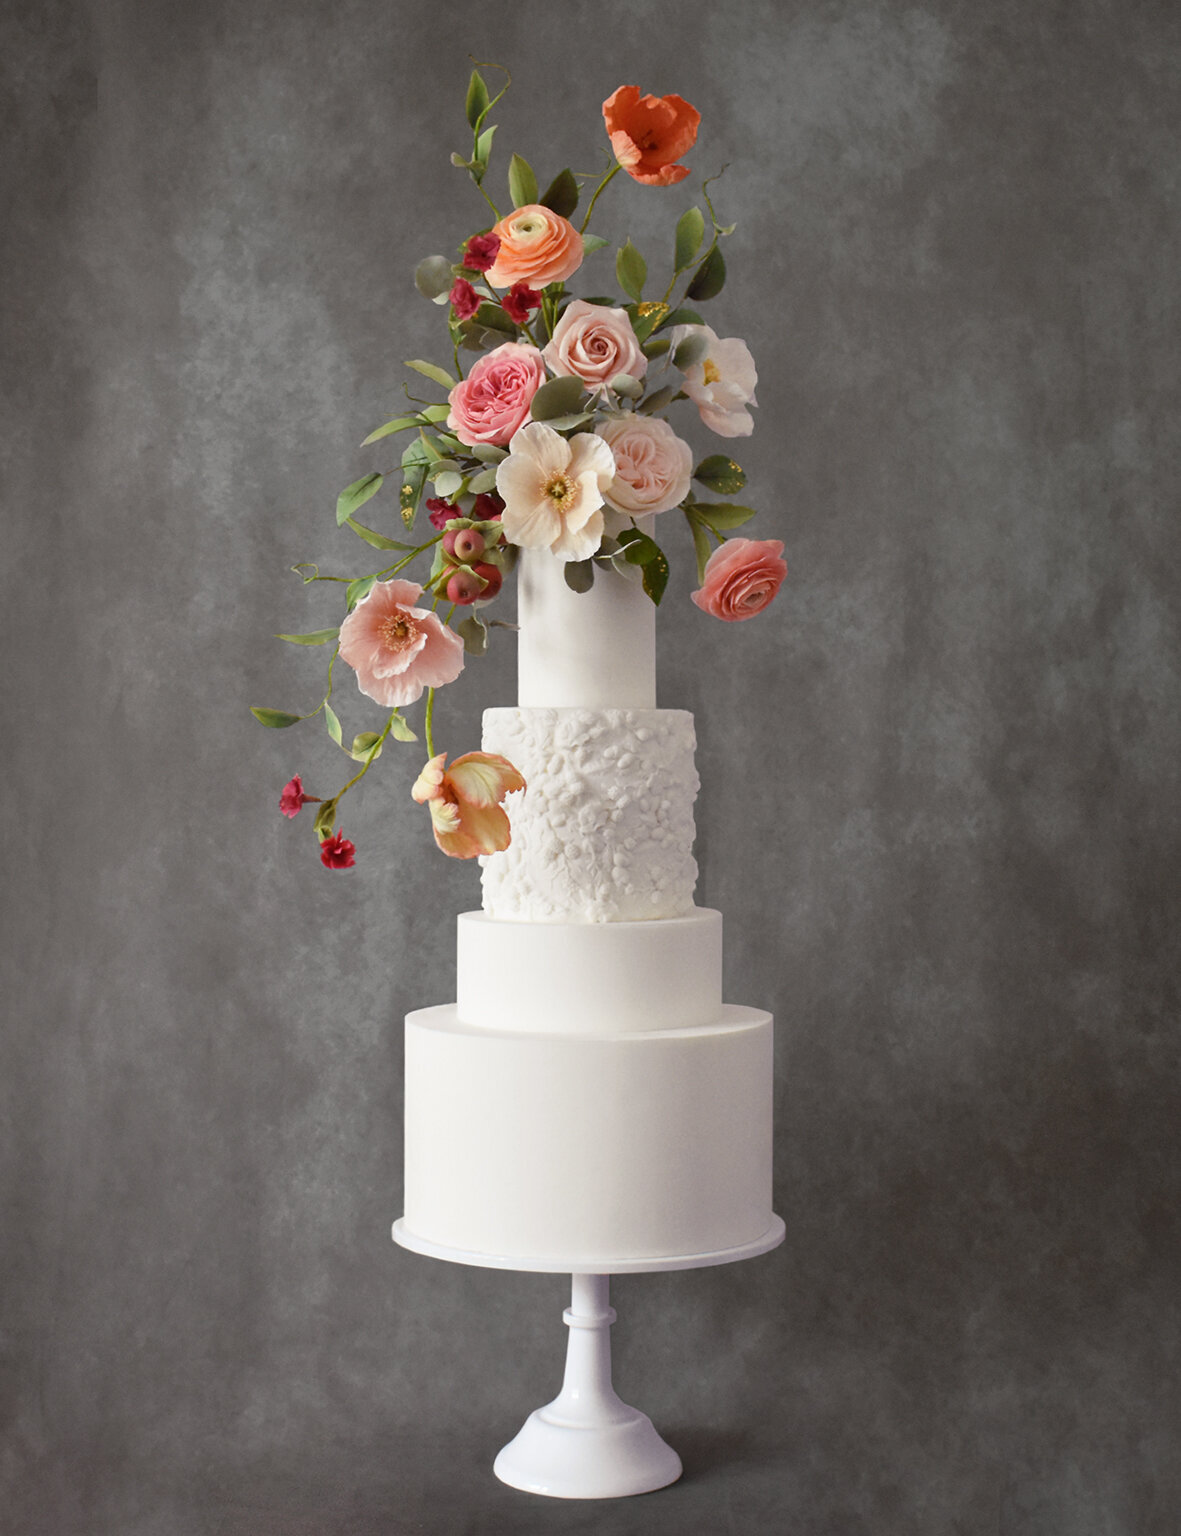 A grand white wedding cake with ornate piping and pink and white sugar flowers